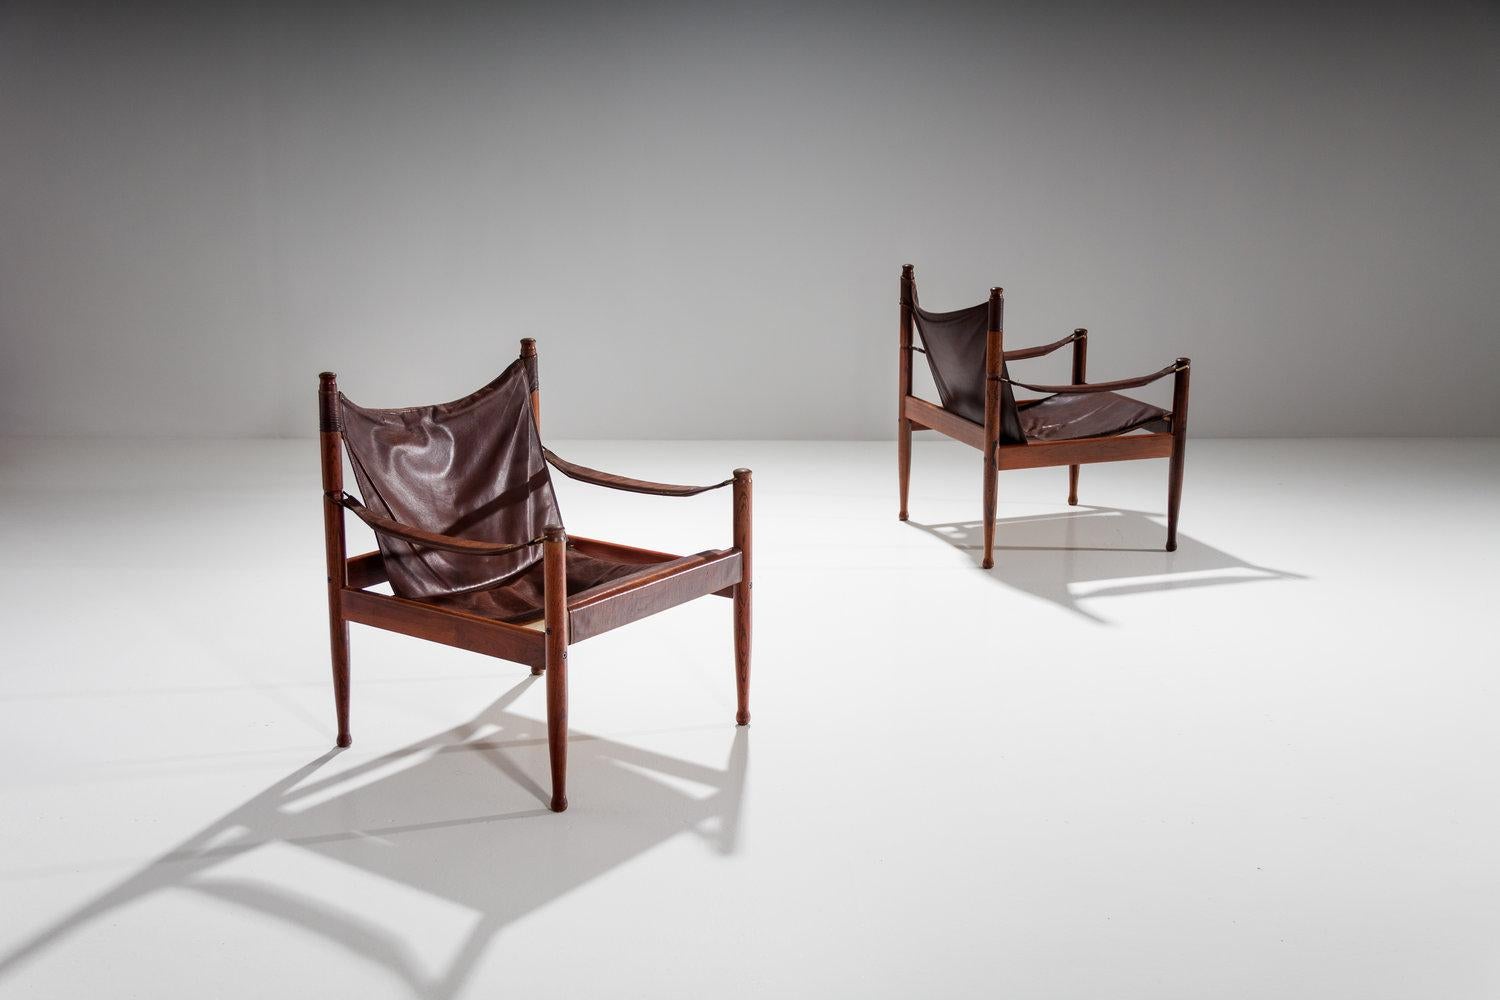 Pair of rosewood safari chairs designed by Erik Wørts manufactured by Eilersen, Denmark, 1960s

The design of this slender and elegant pair of safari chairs by Erik Wørts sits in a long tradition of safari chairs. From Eileen Gray to Kaare Klint